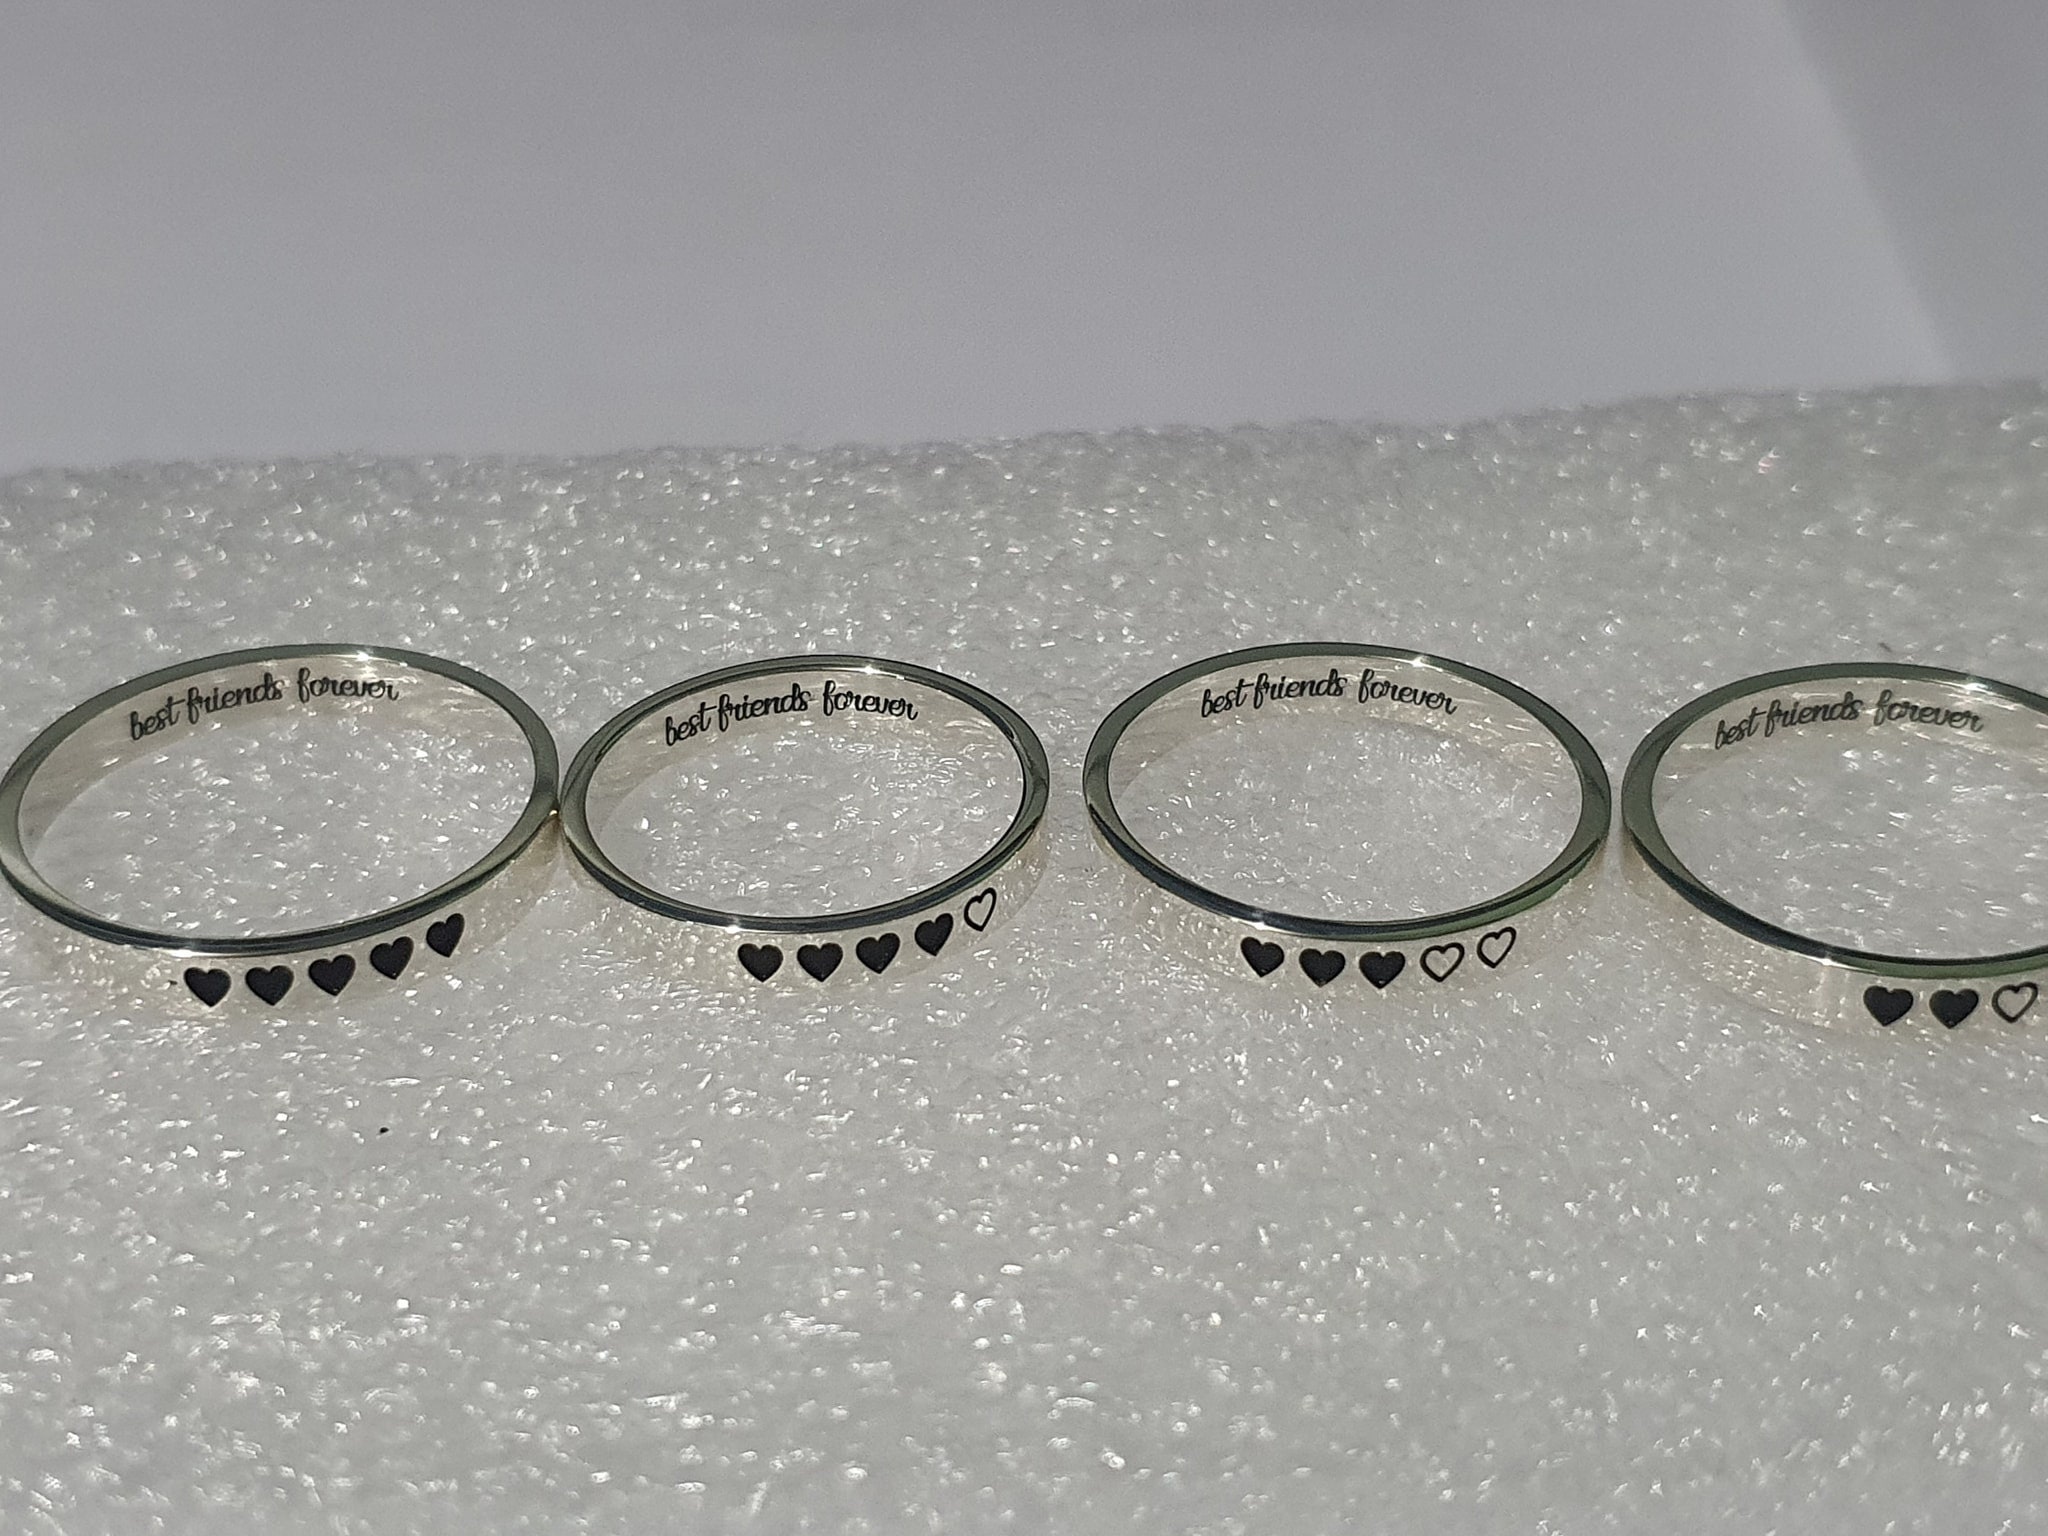 ZKXXJ Personalized BFF Rings for 2/3/4/5/6,Custom Nameplates Coordinate Friendship  Ring Set,Custom Engraved Finger Band Best Friends Rings Friendship Jewelry  Gift for Sister,Bridesmaid,Friends|Amazon.com